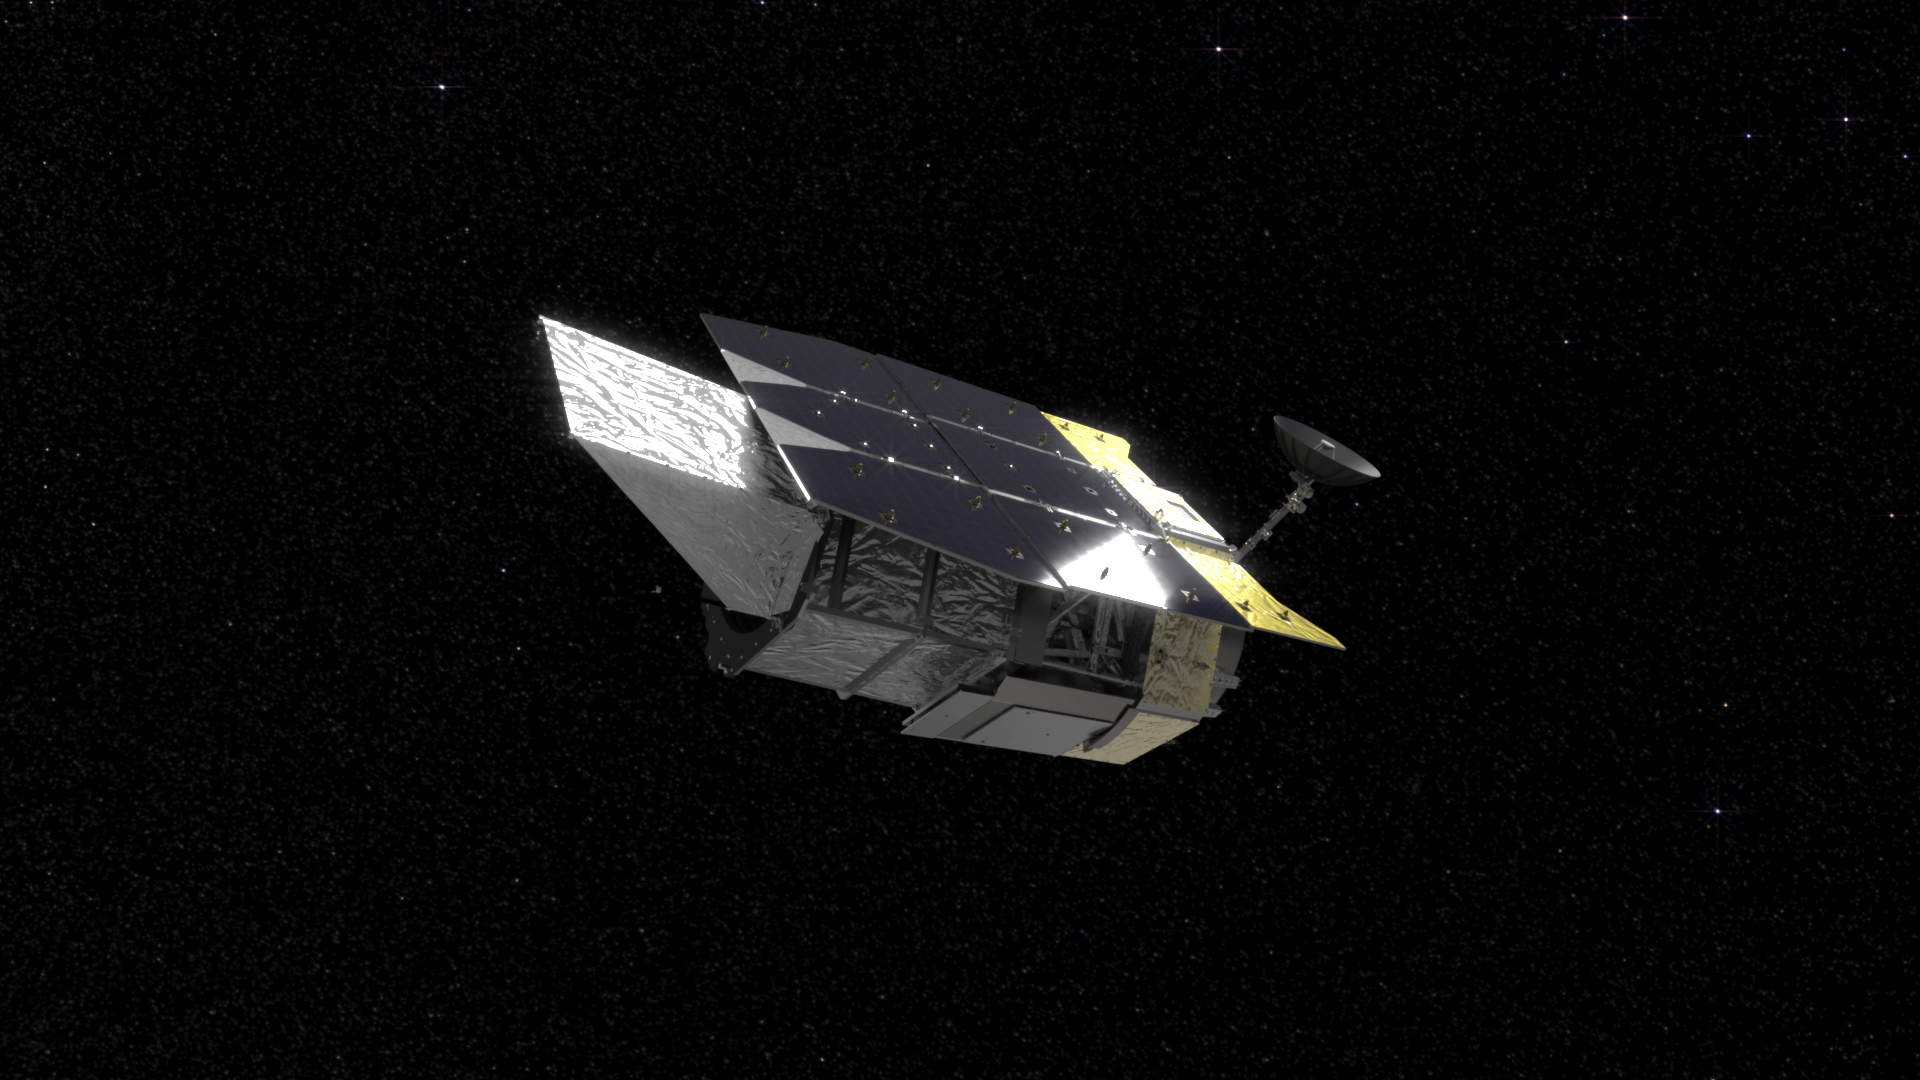 Illustration of NASA’s Wide Field Infrared Survey Telescope (WFIRST)